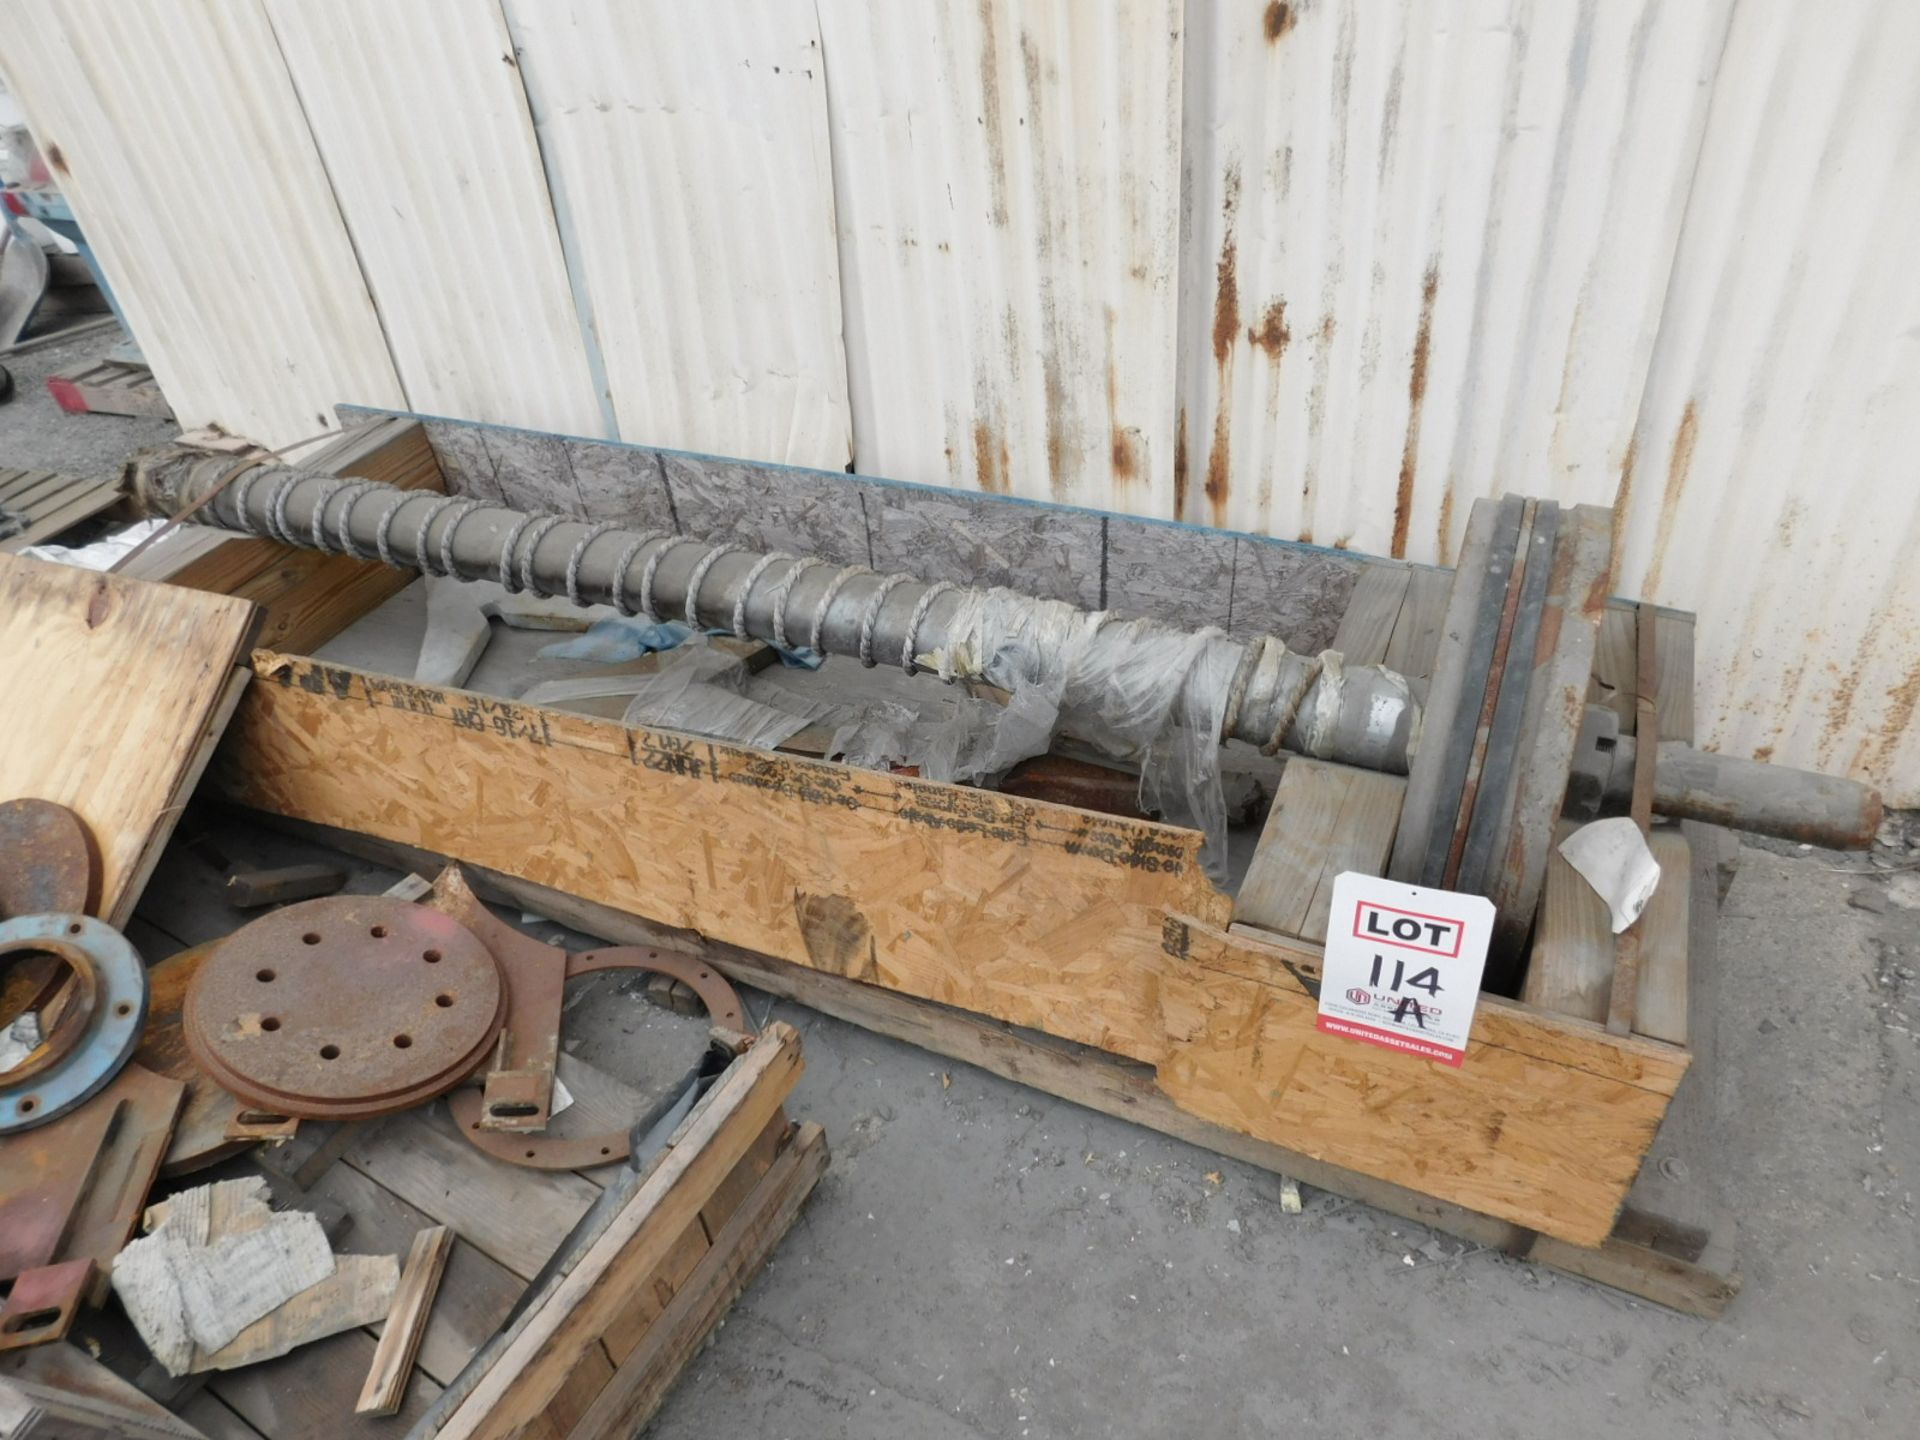 MIXER ORIFICE GATE PLUNGER, S/N: N/A [RIGGING FEE FOR LOT #114A - $100 USD PLUS APPLICABLE TAXES]